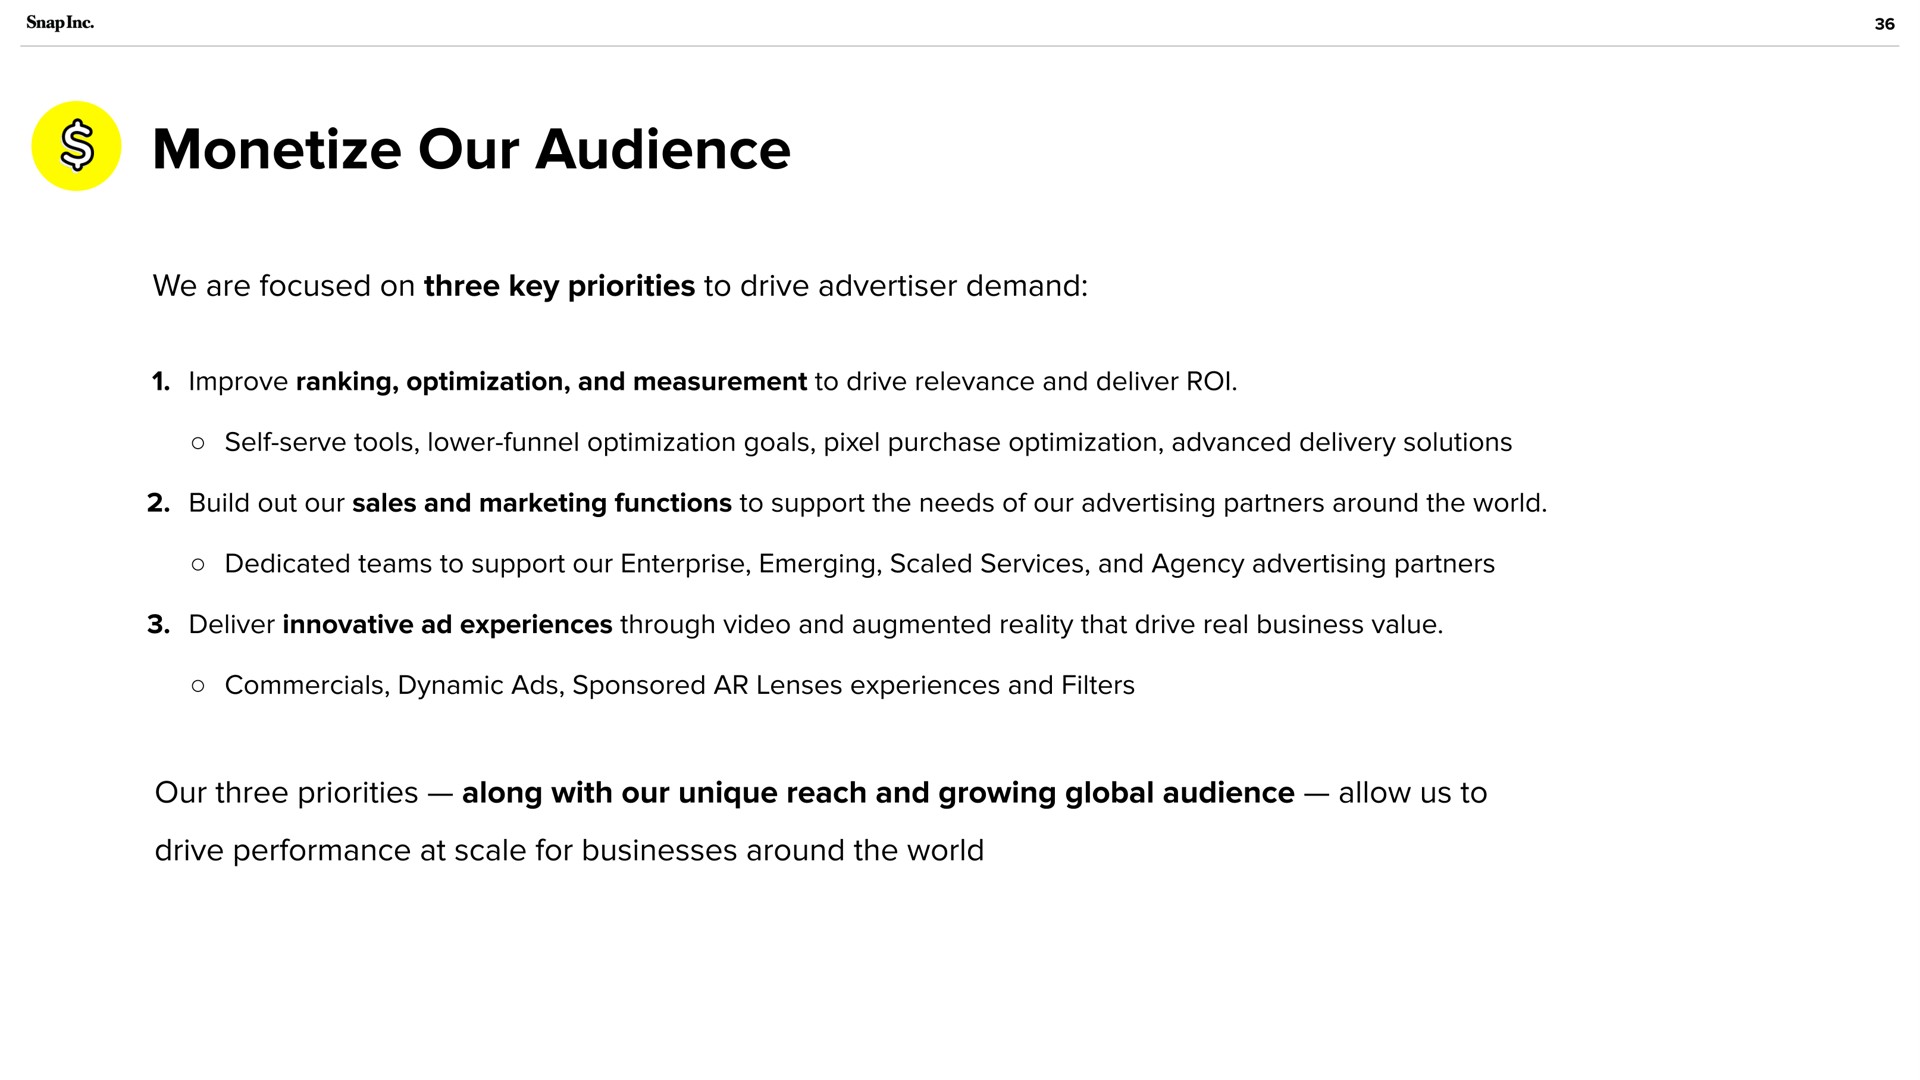 monetize our audience | Snap Inc